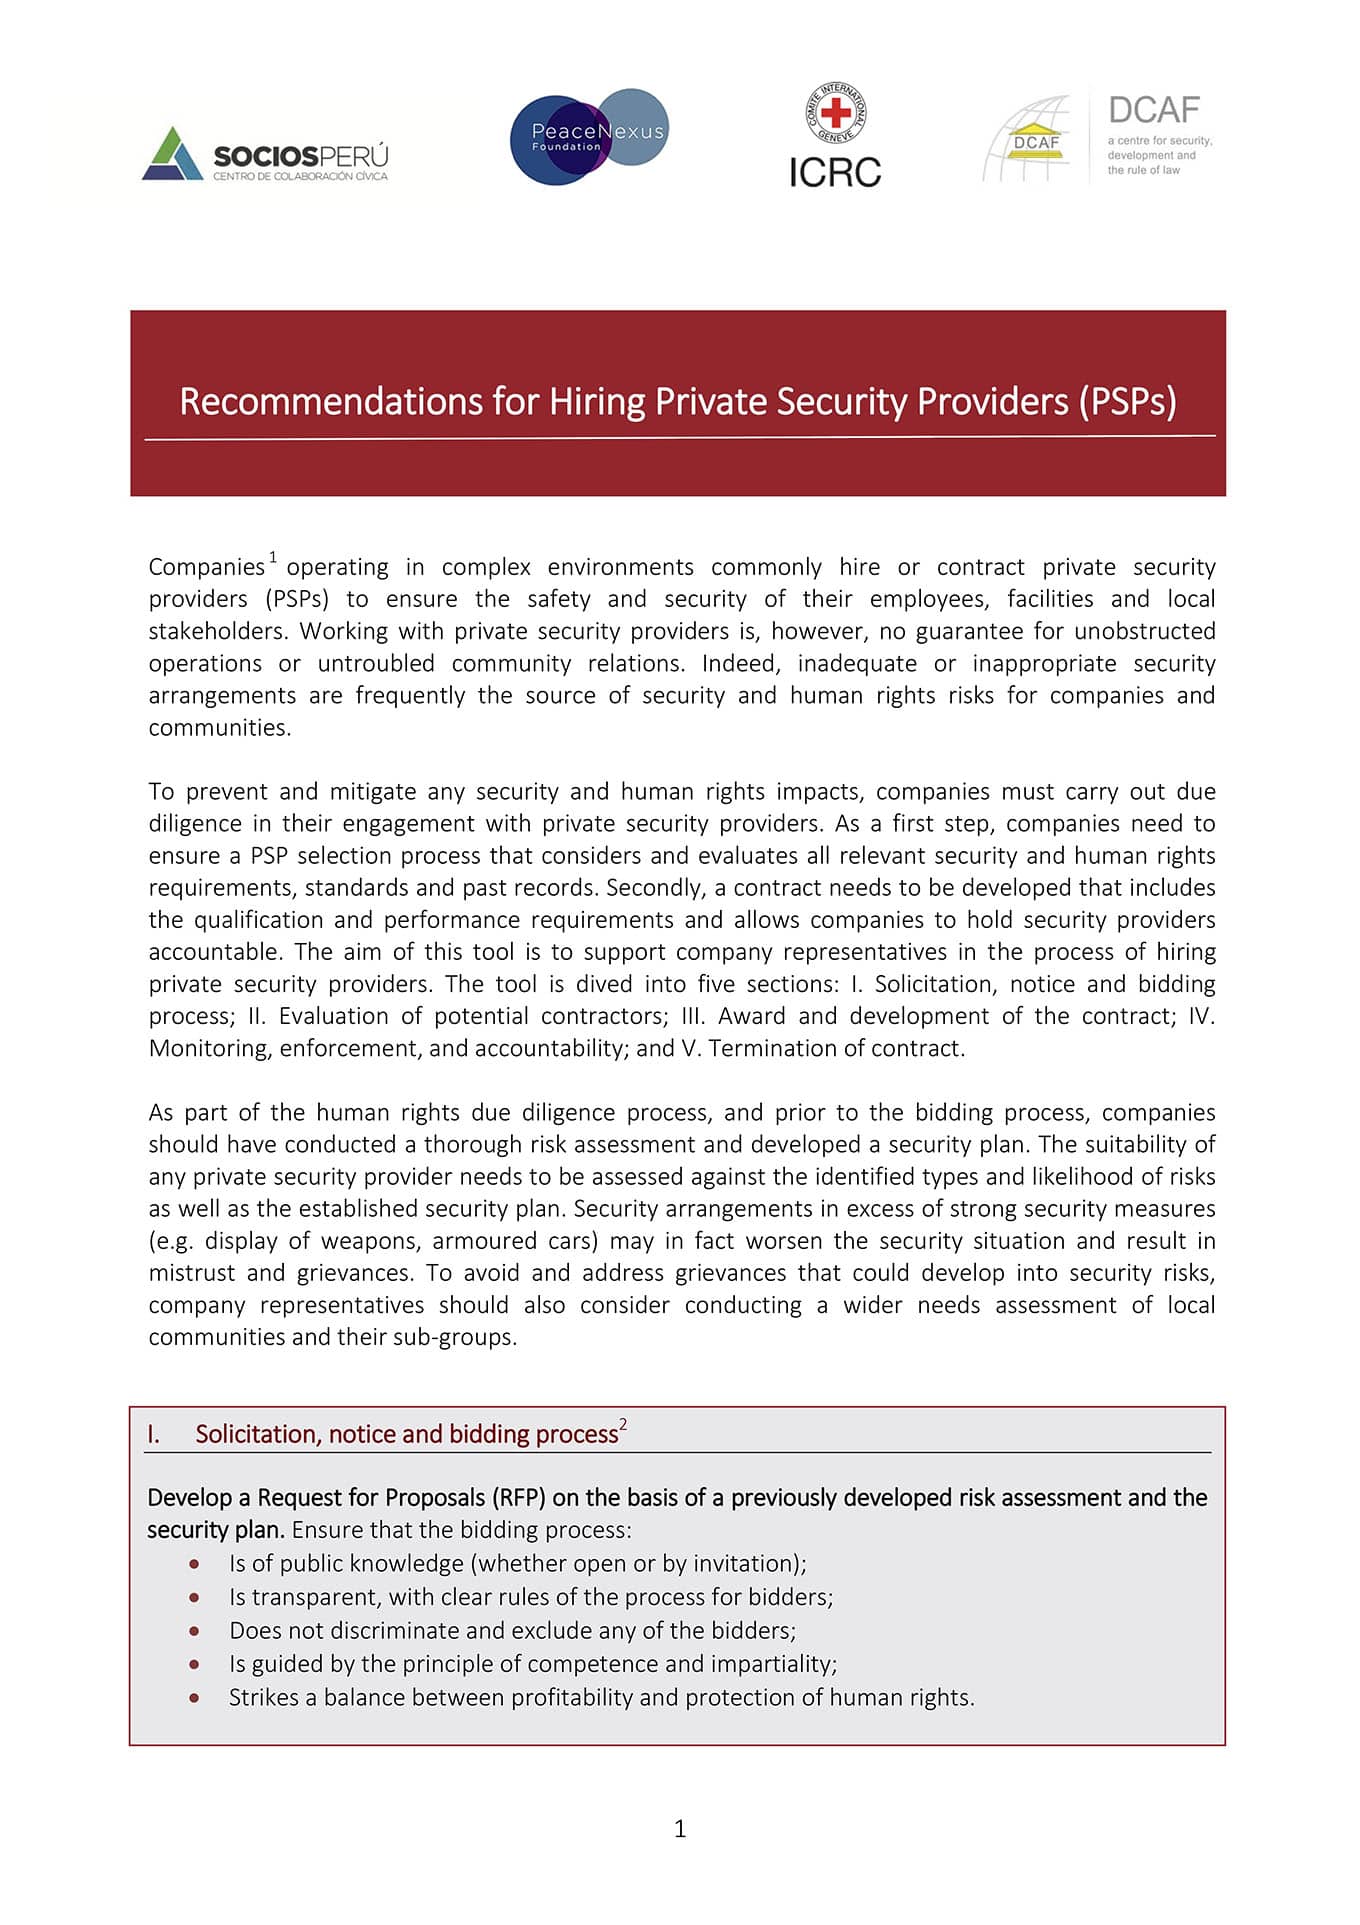 Recommendations for Hiring Private Security Providers (DCAF, ICRC, Socios Peru, and PeaceNexus, 2016)